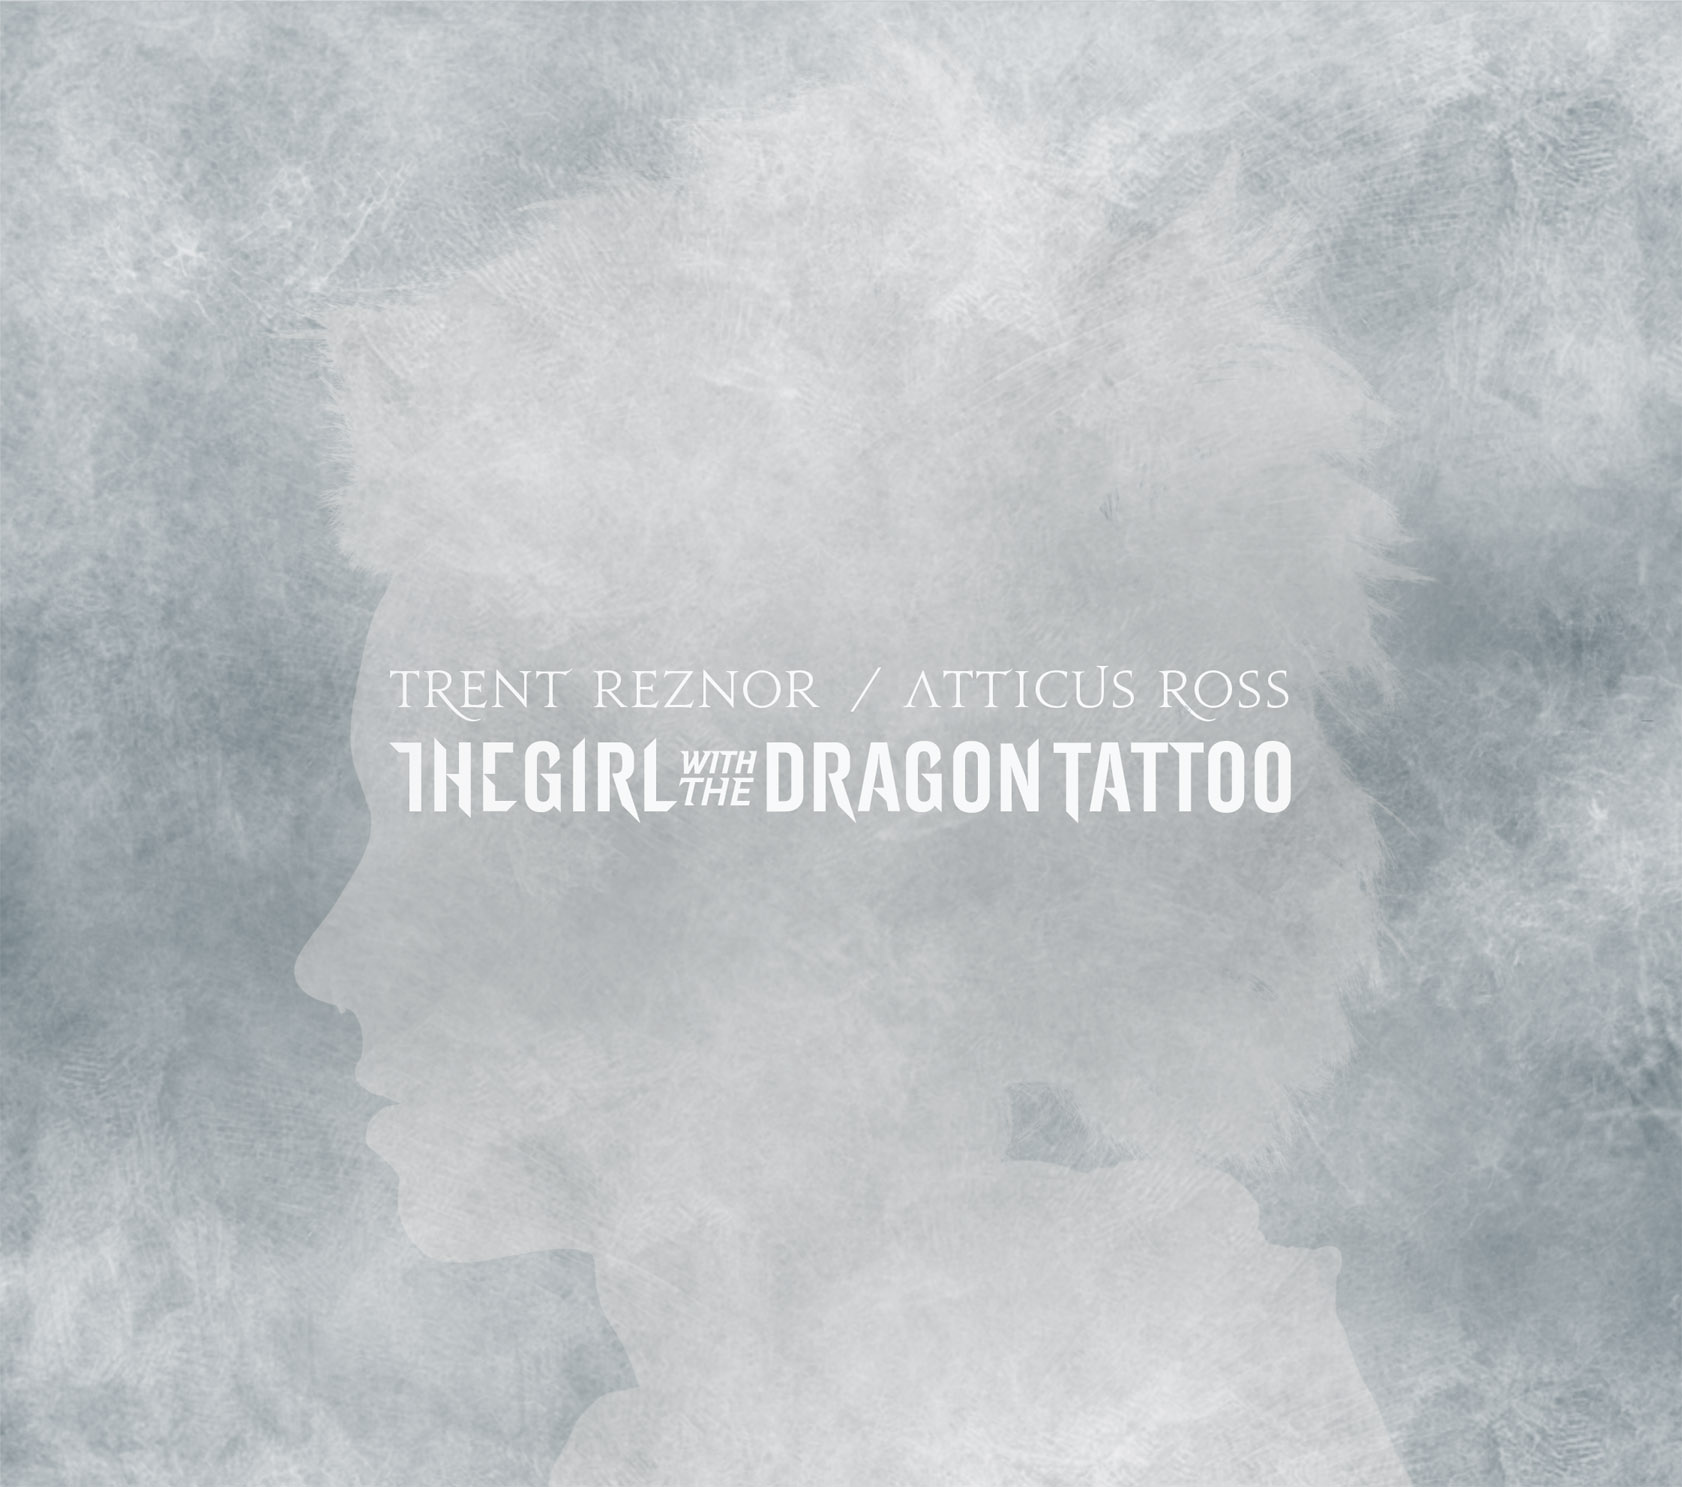 Trent Reznor & Atticus Ross Announce 'The Girl With The Dragon Tattoo' Soundtrack